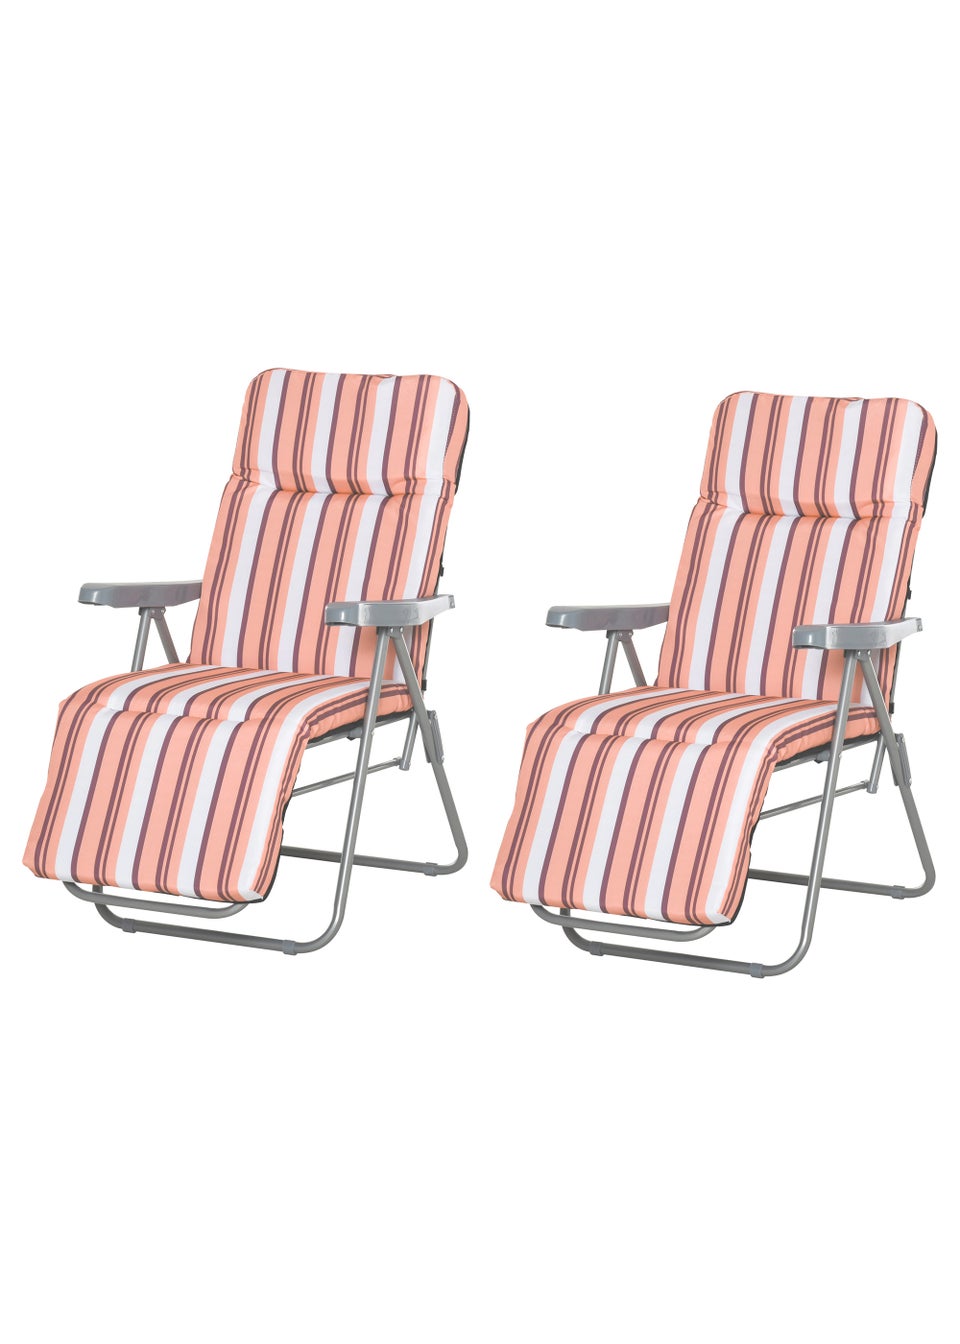 Outsunny Set of 2 Garden Patio Foldable  Sun Recliners Loungers